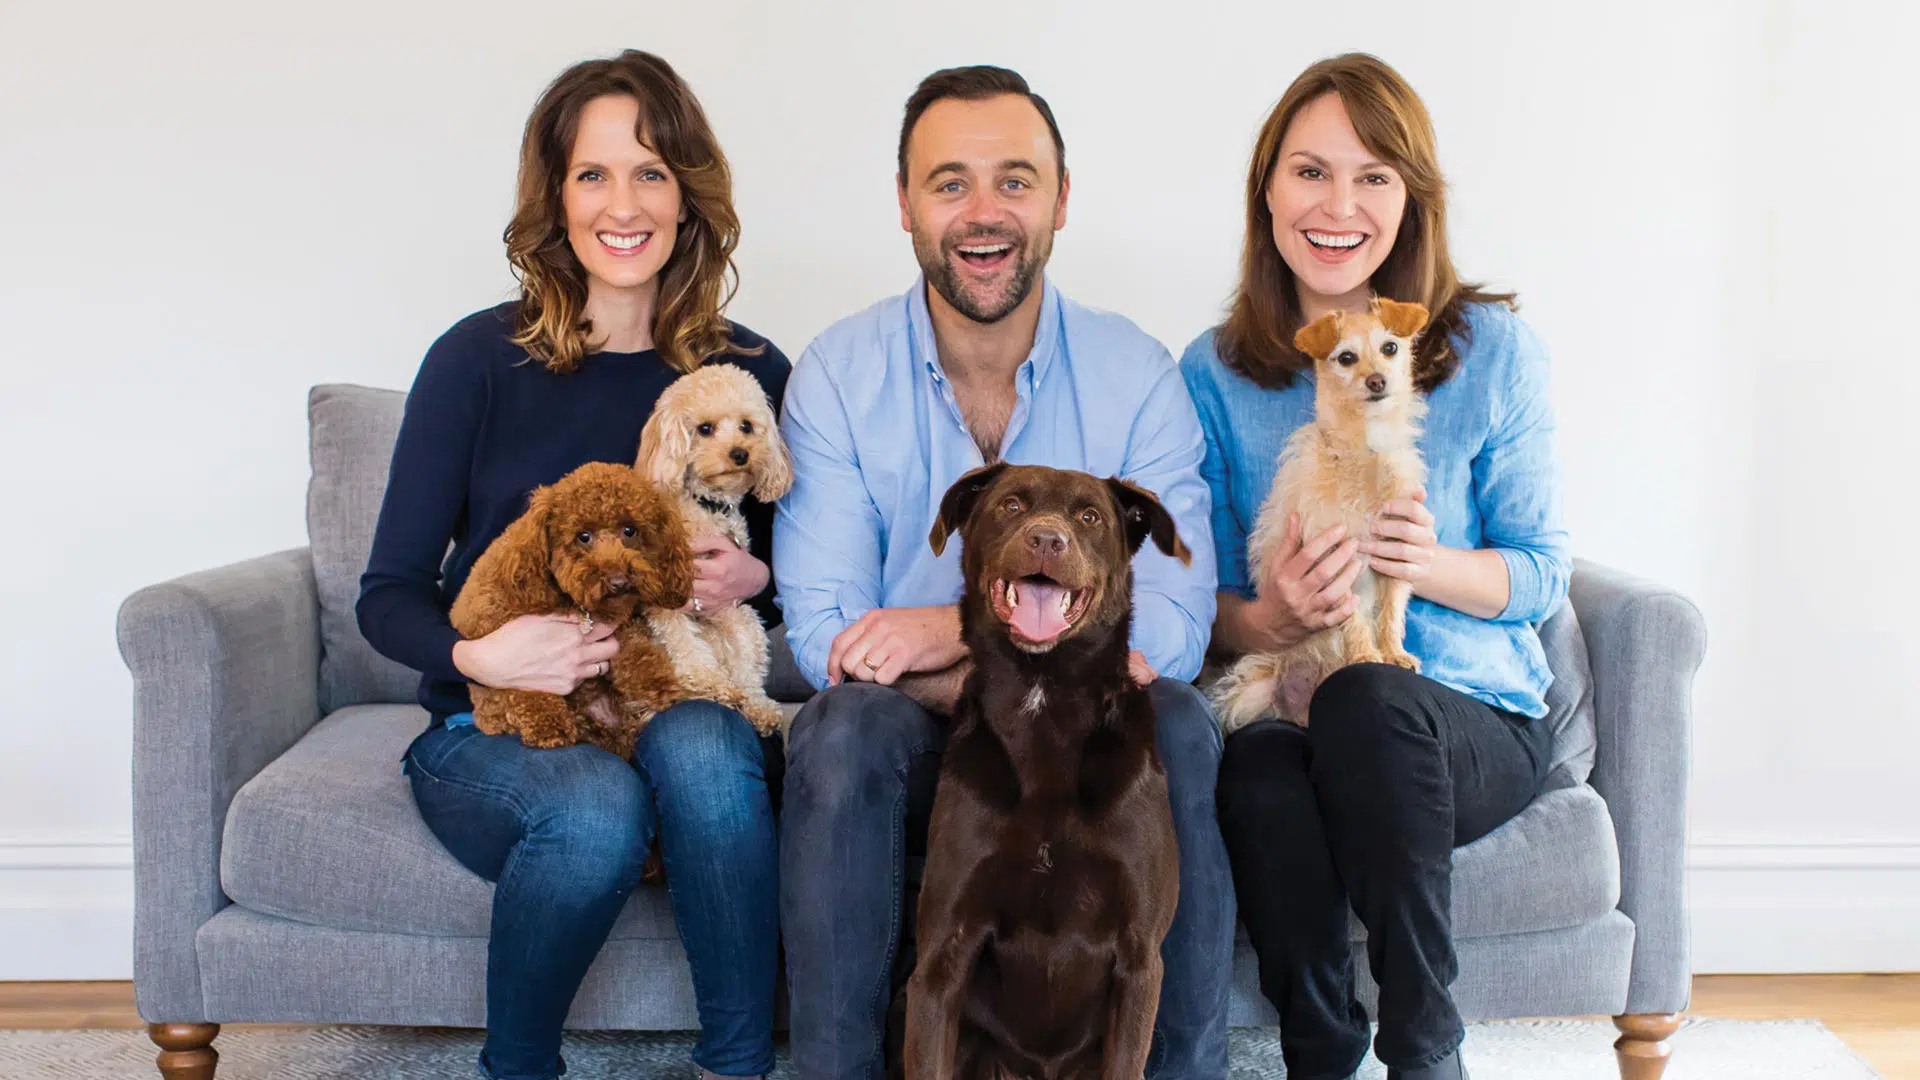 Pooches at Play launches on TEN